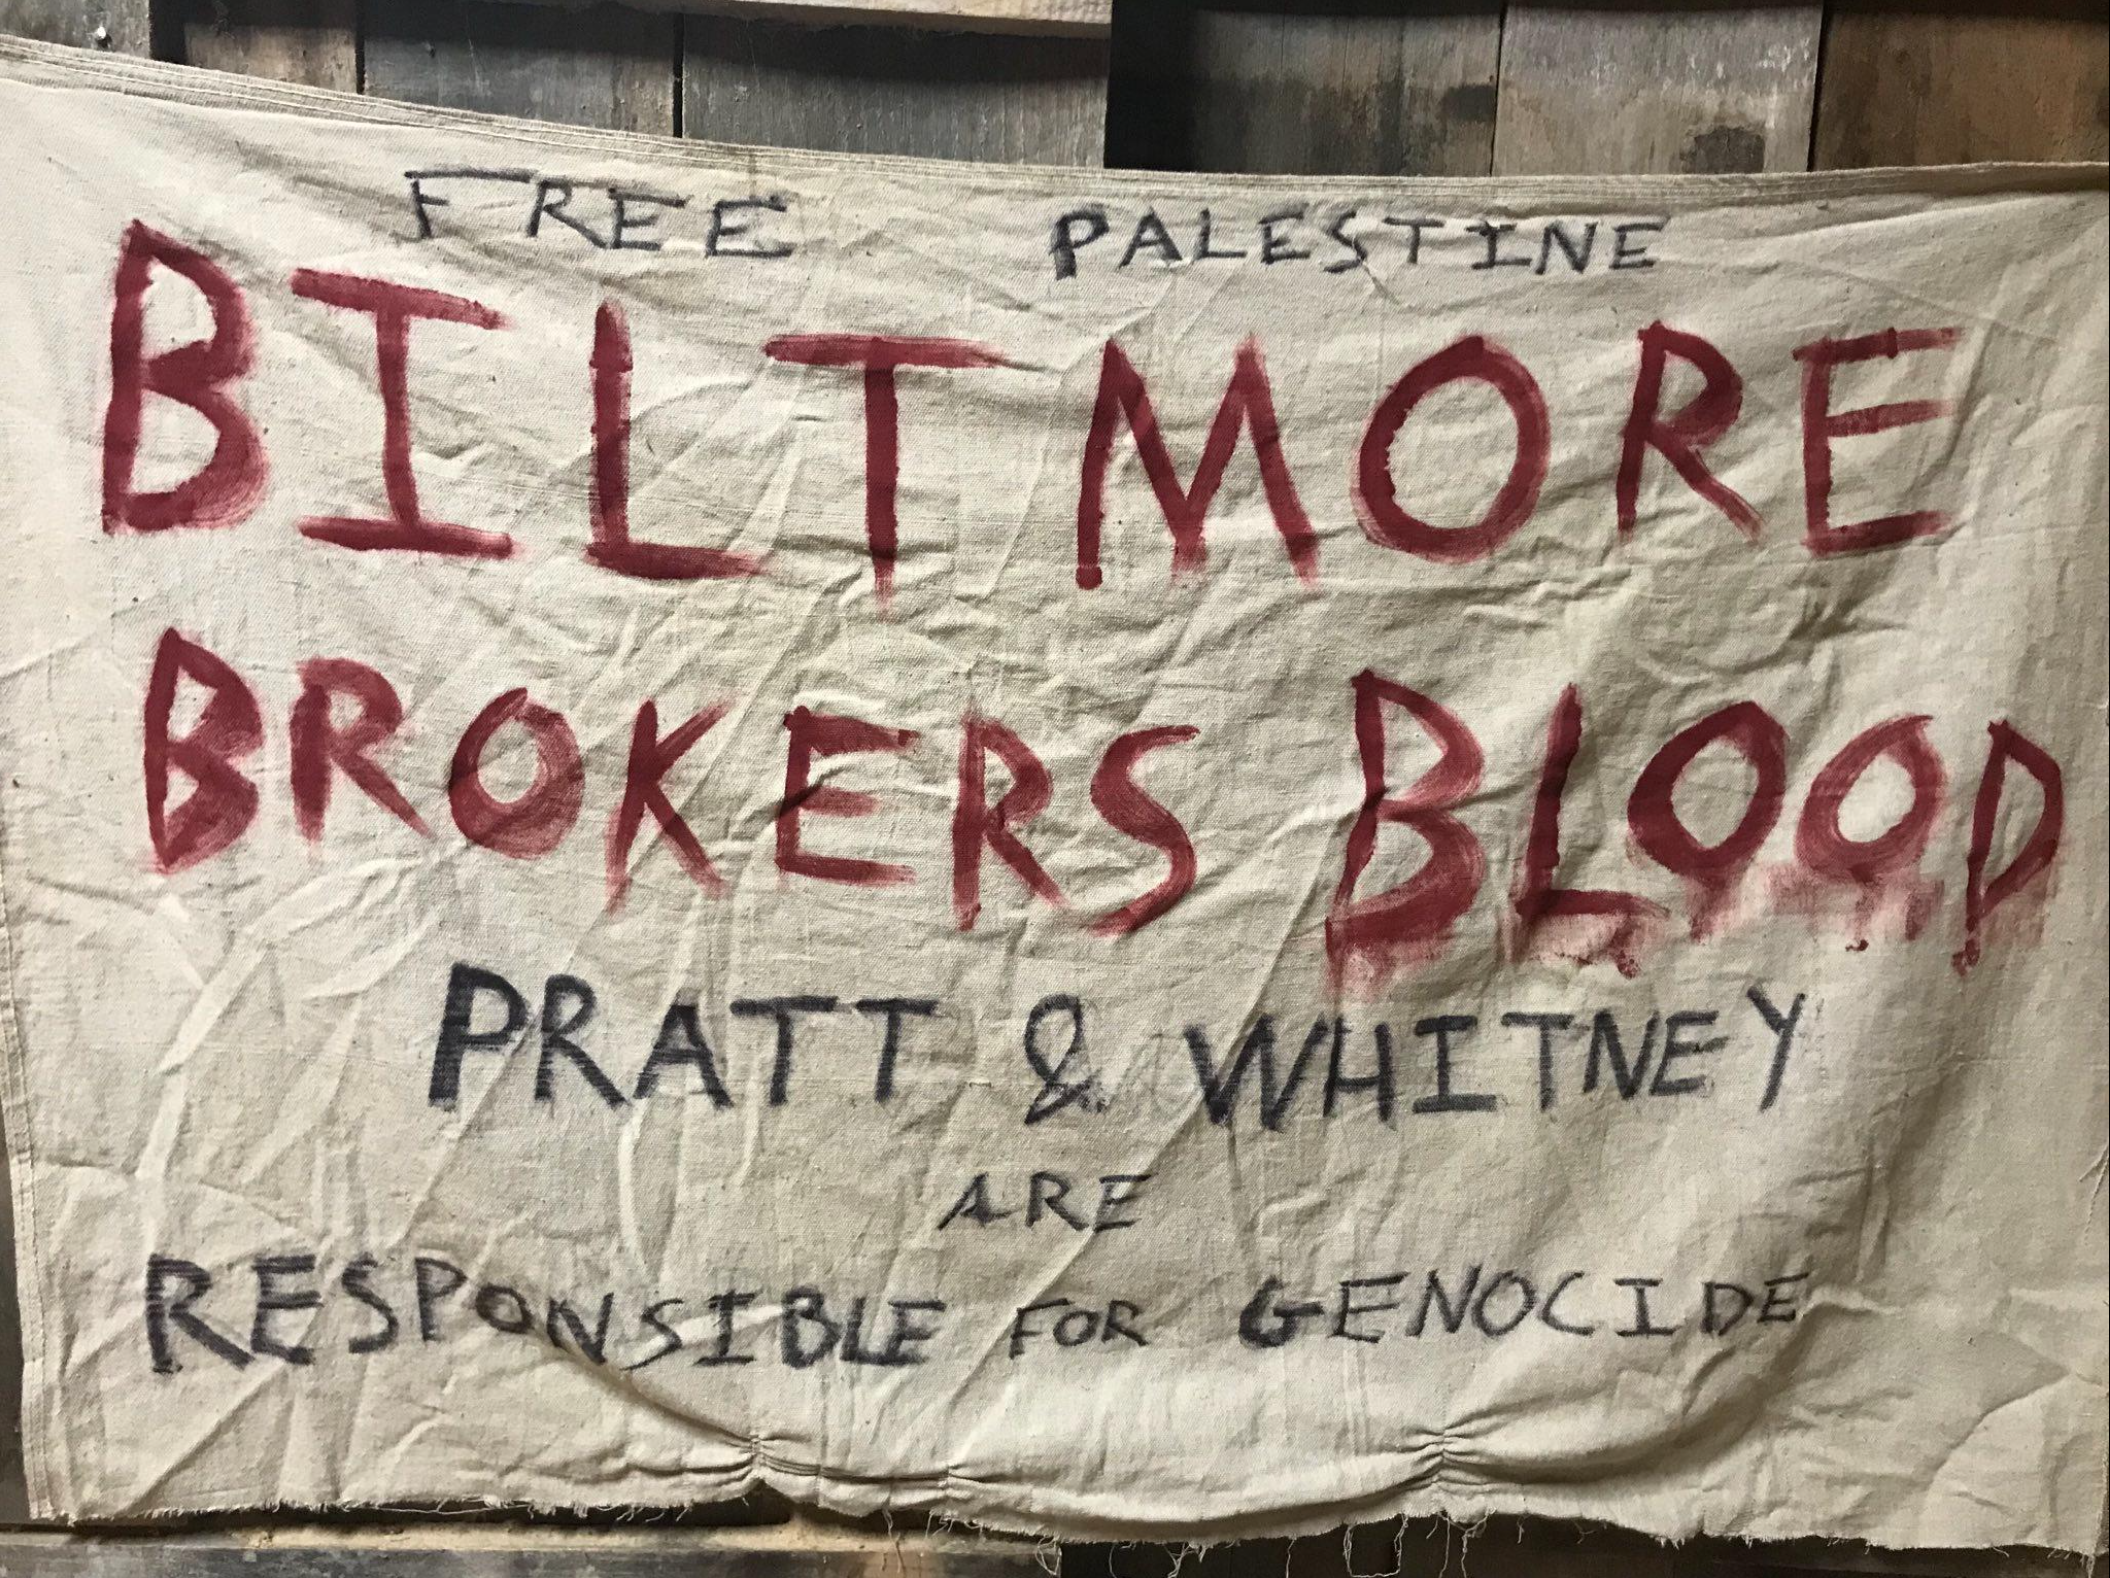 A banner with text "Free Palestine, Biltmore Brokers Blood, Pratt & Whitney are Responsible for Genocide"